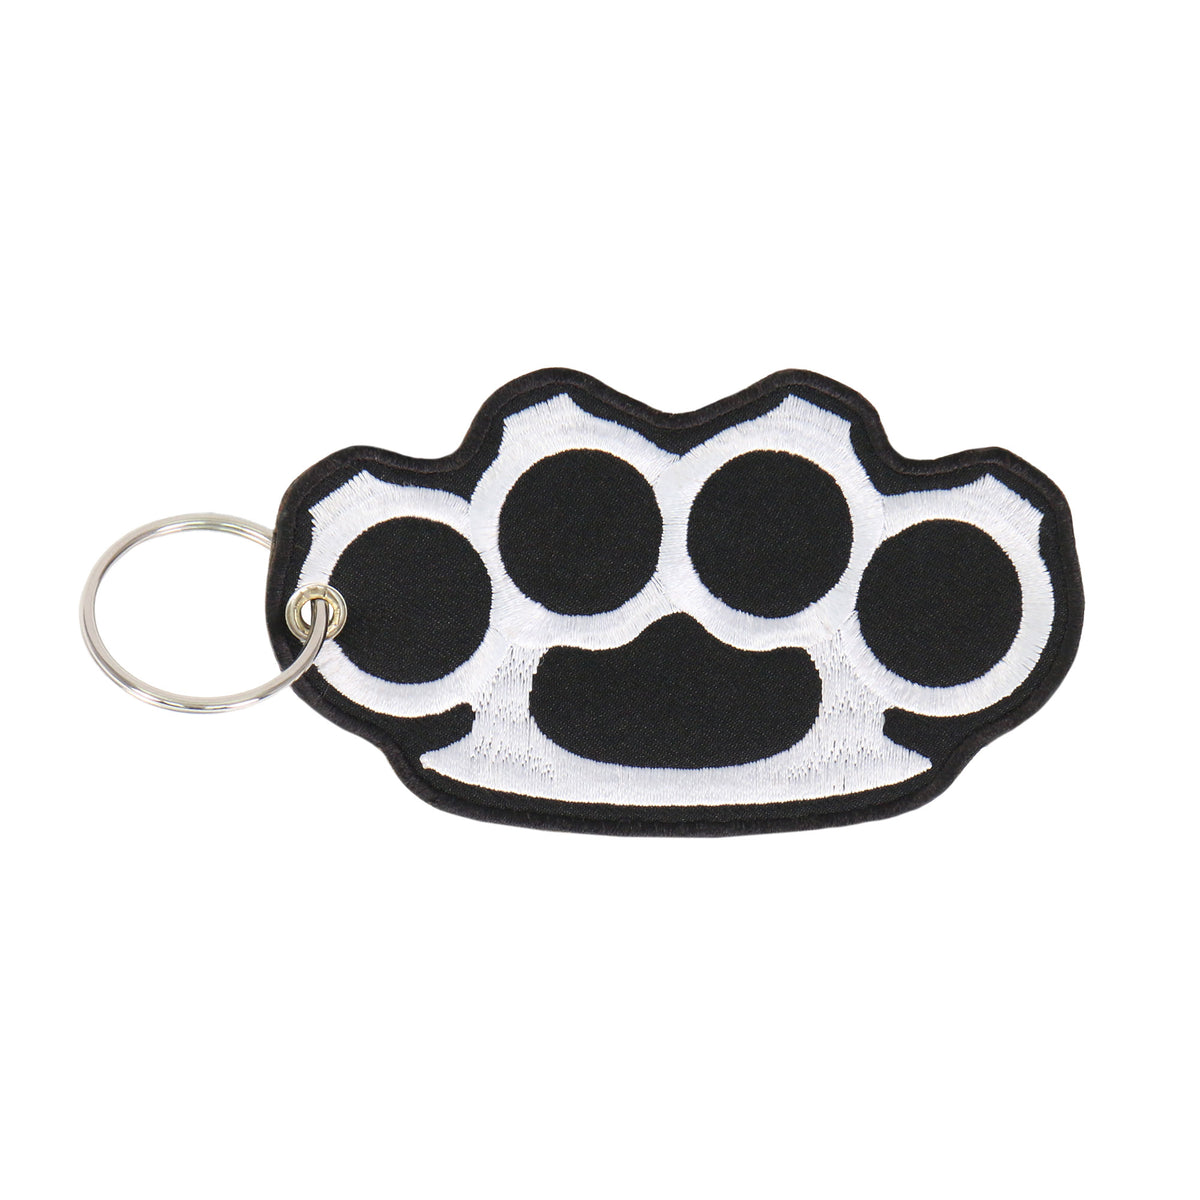 Hot Leathers KCH1029 Brass Knuckles Embroidered Key Chain